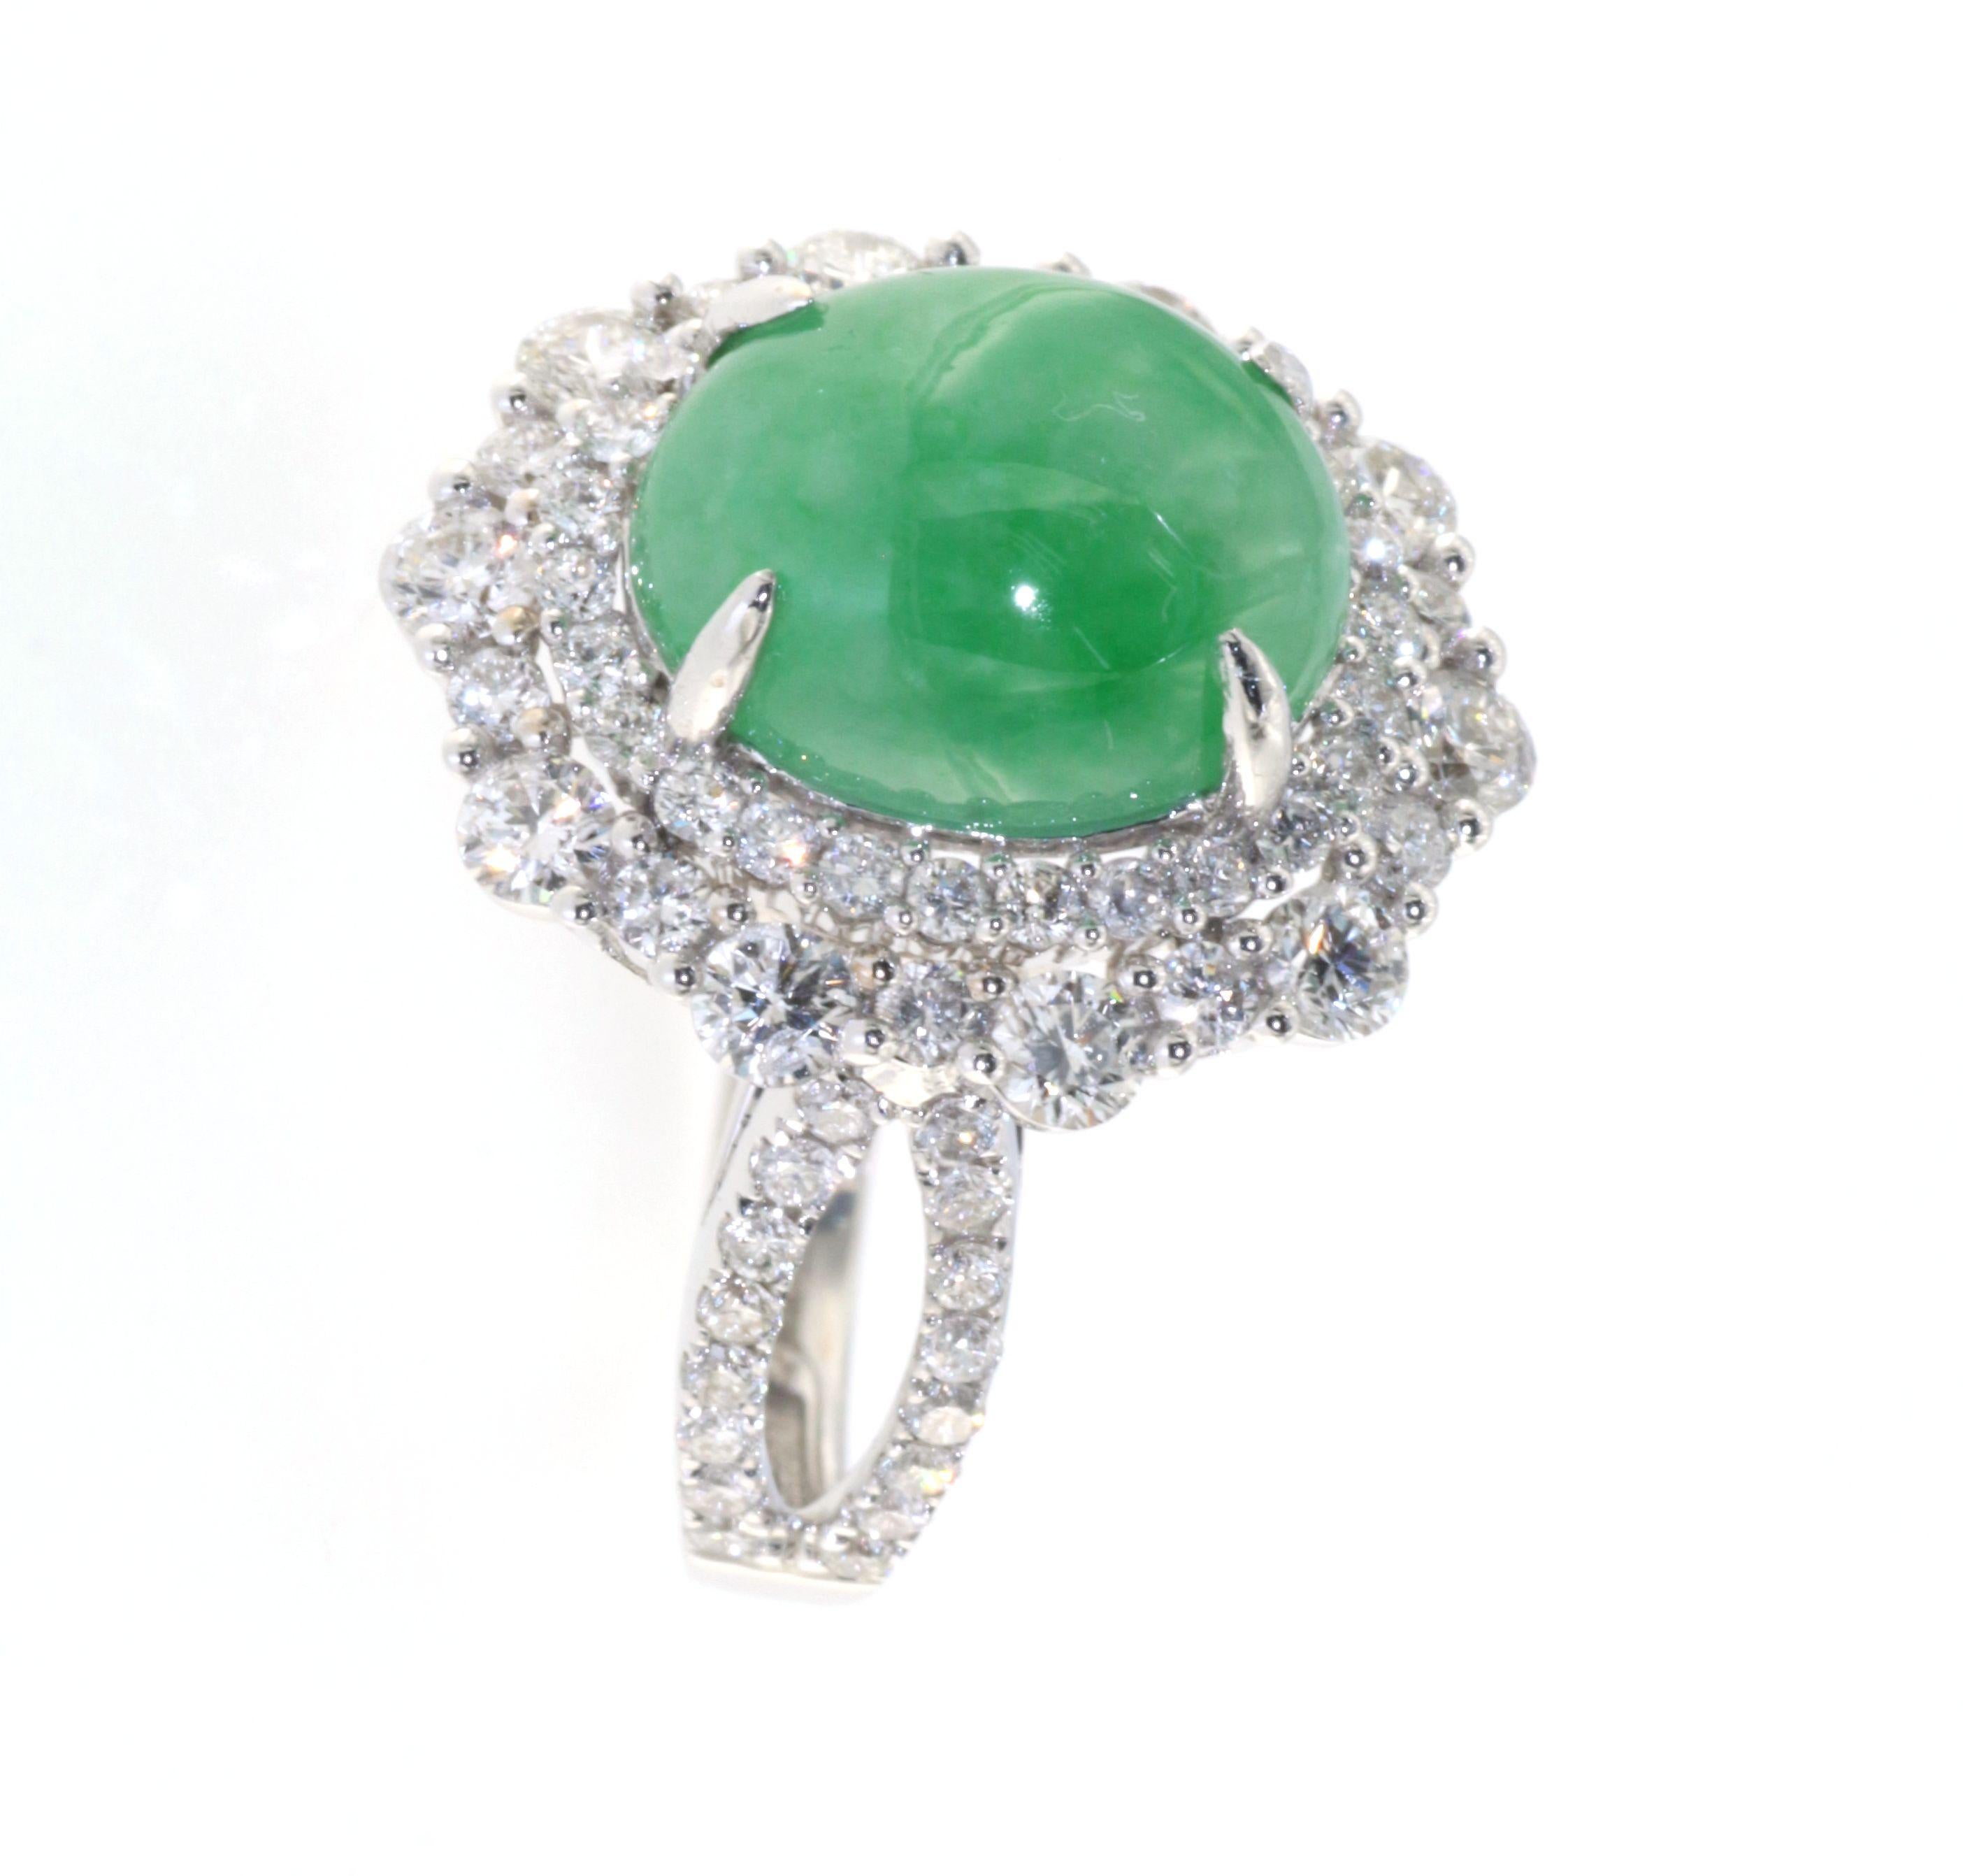 Introducing our Timeless style Jadeite and Diamond Ring in 18 Karat White Gold. This exquisite ring combines the allure of jadeite and the brilliance of diamonds, creating a stunning piece that exudes elegance and sophistication. The main stone of